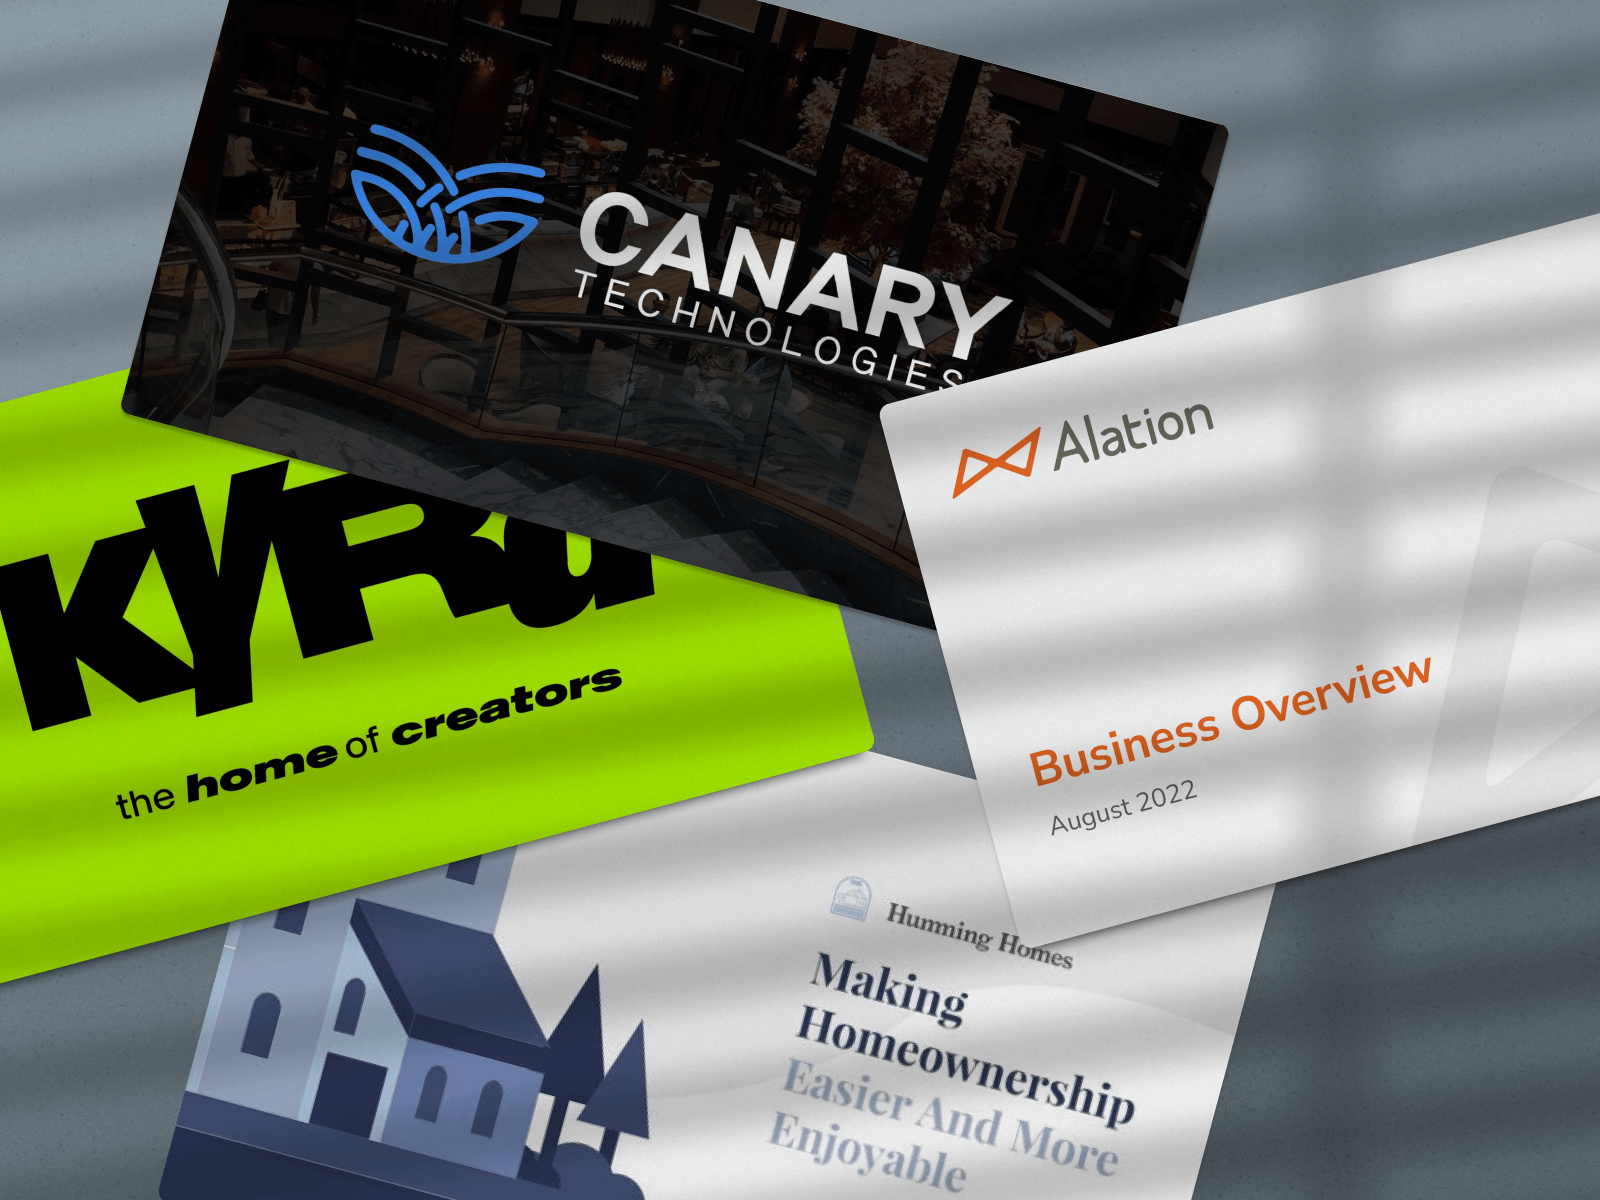 This week in pitch decks: Canary, Alation, Kyra, Humming Homes